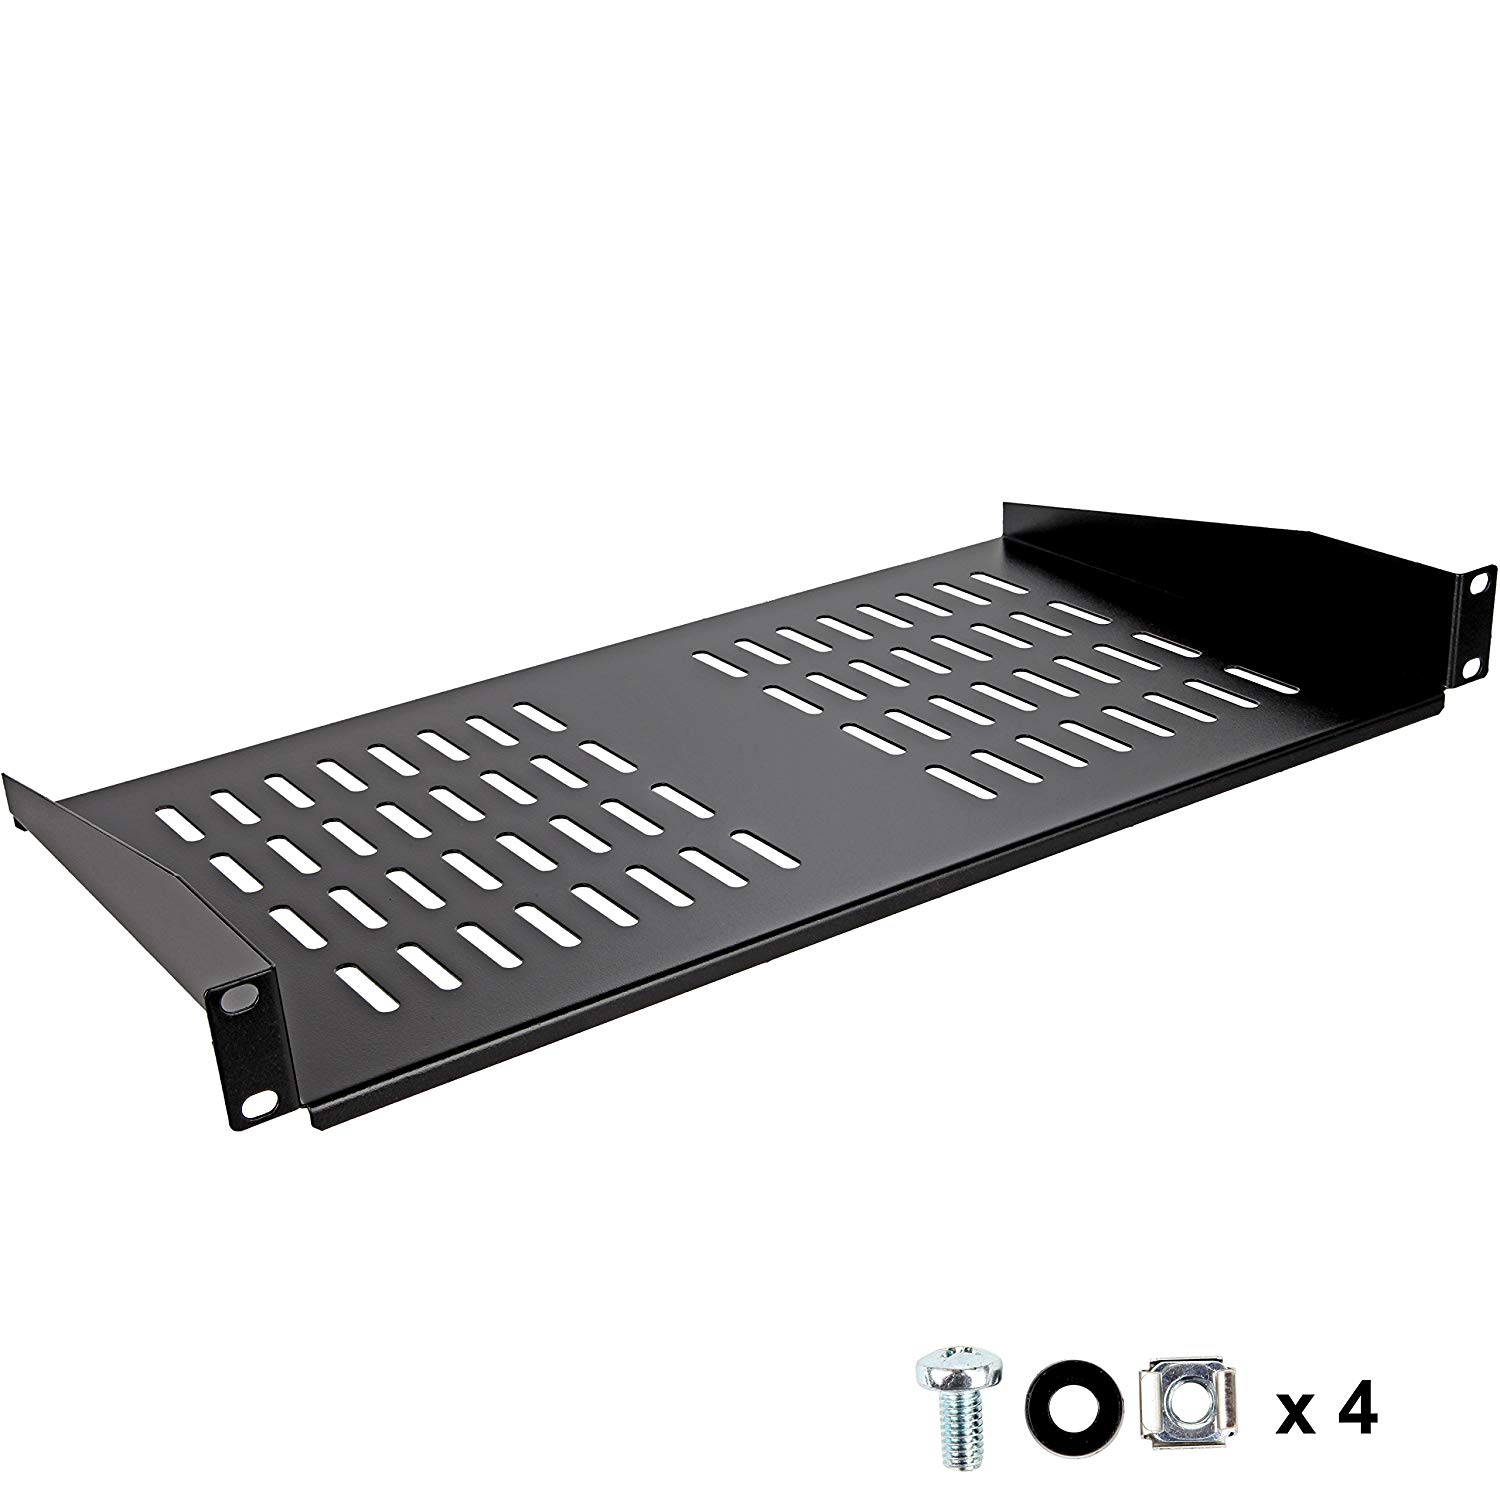 1U Vented Server Rack Mount Shelf Jingchengmei 10in Deep Steel Universal Cantilever Tray for 19-Inch AV and Network Equipment Rack 2 Pack 44lbs Disassembled for Safety